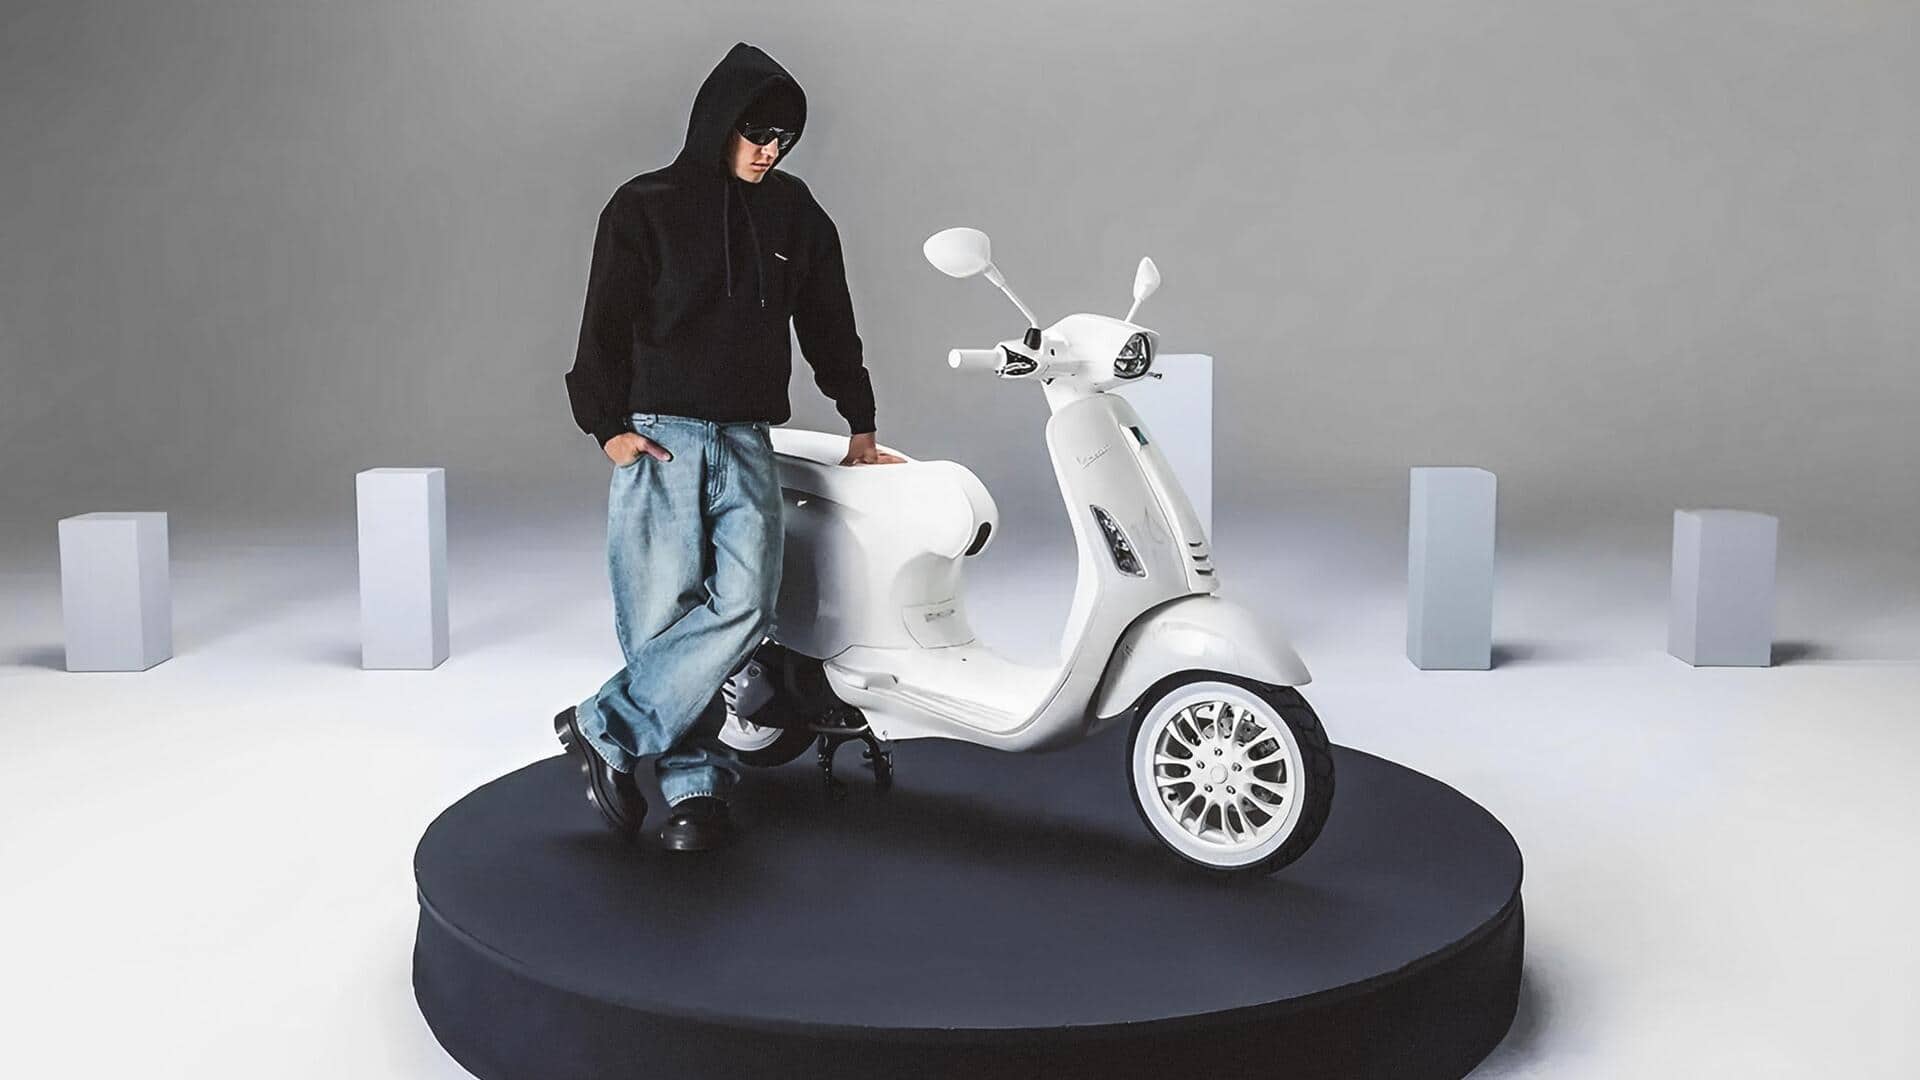 Vespa Justin Bieber scooter debuts in India at Rs. 6.5L